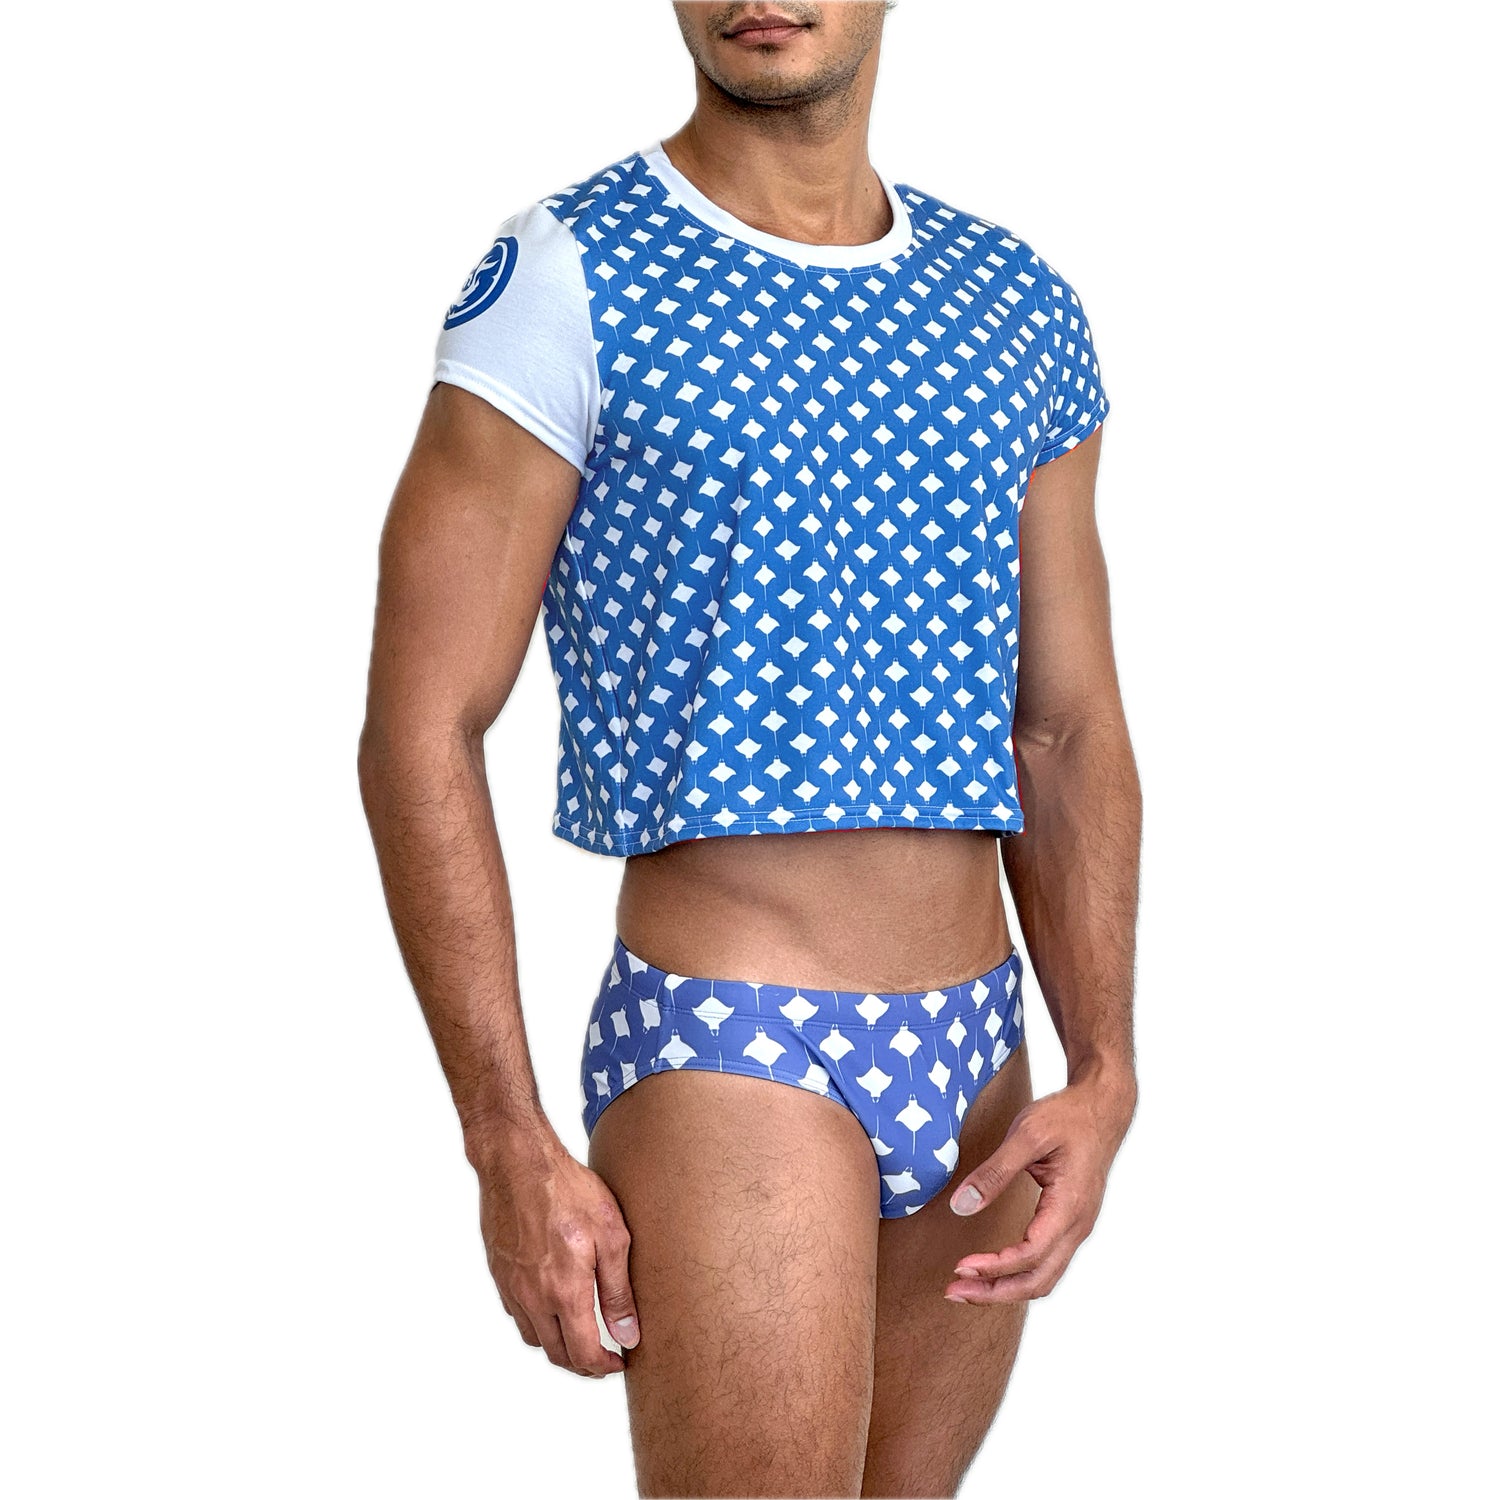 Manta Ray Men's Swim Outfit Collection